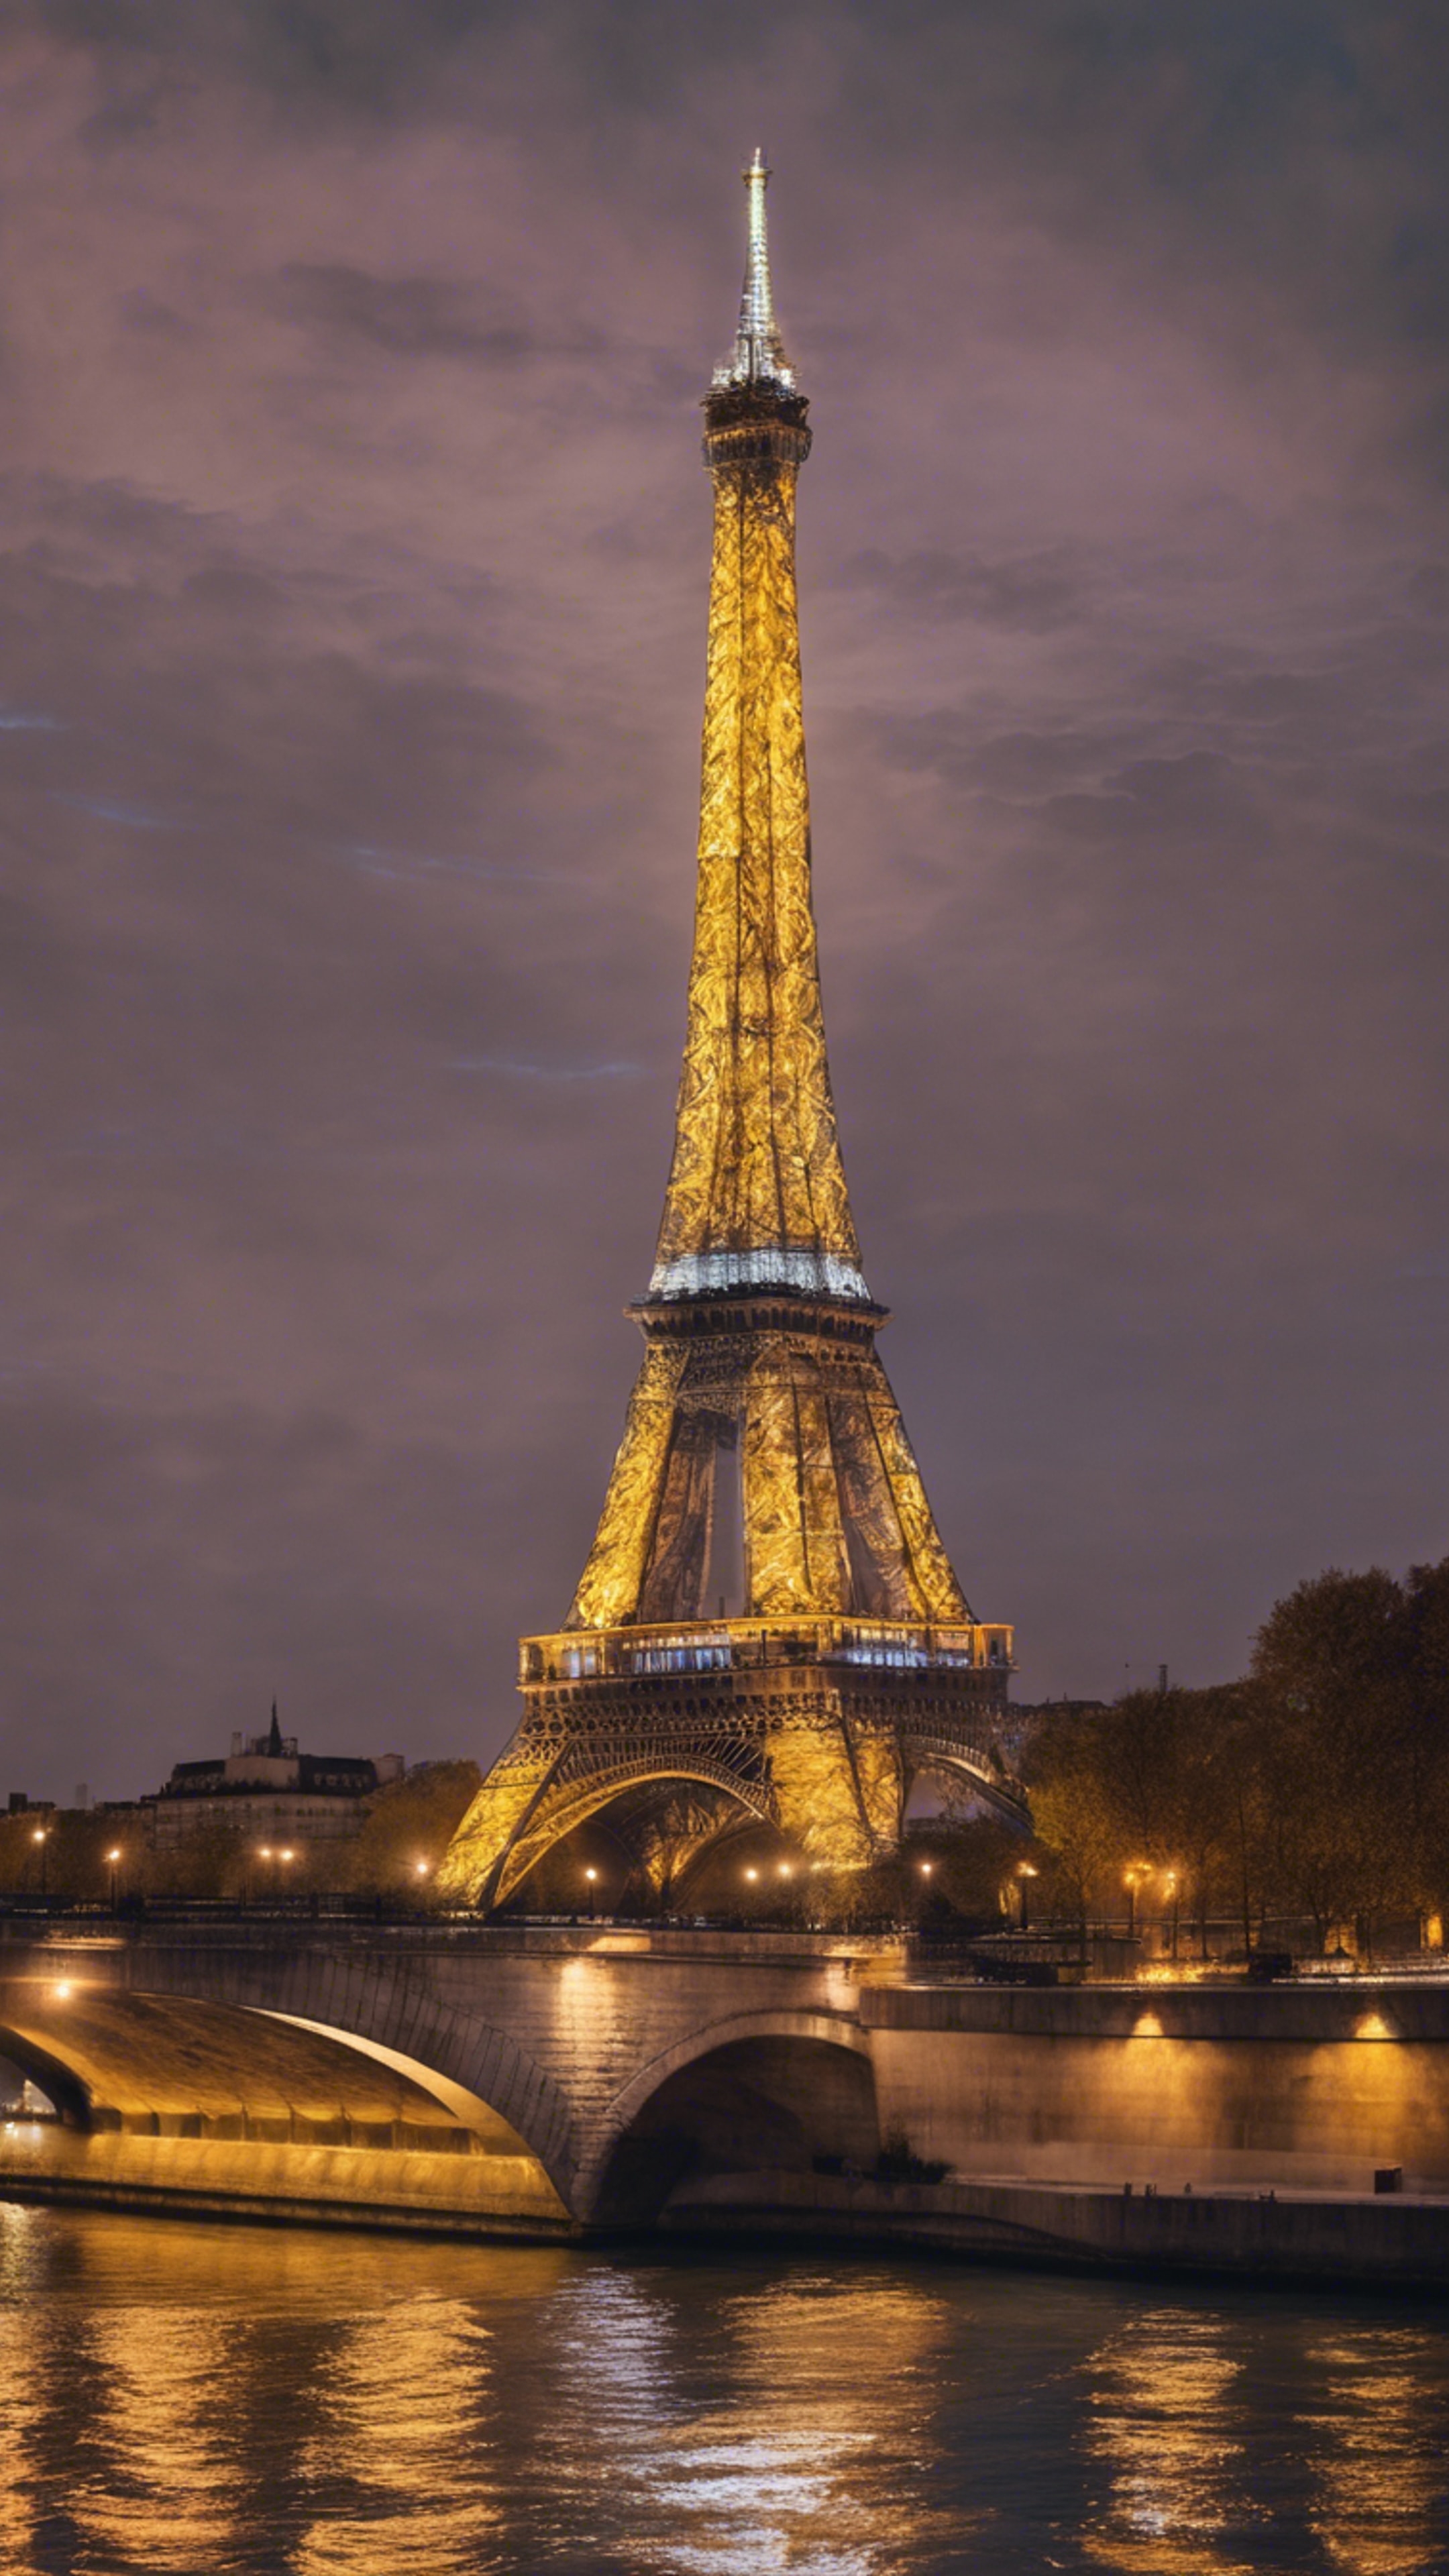 Eiffel tower illuminated against the Paris skyline at night, reflecting in the smooth waters of the river Seine. کاغذ دیواری[bfd7e83086d14adeb14c]